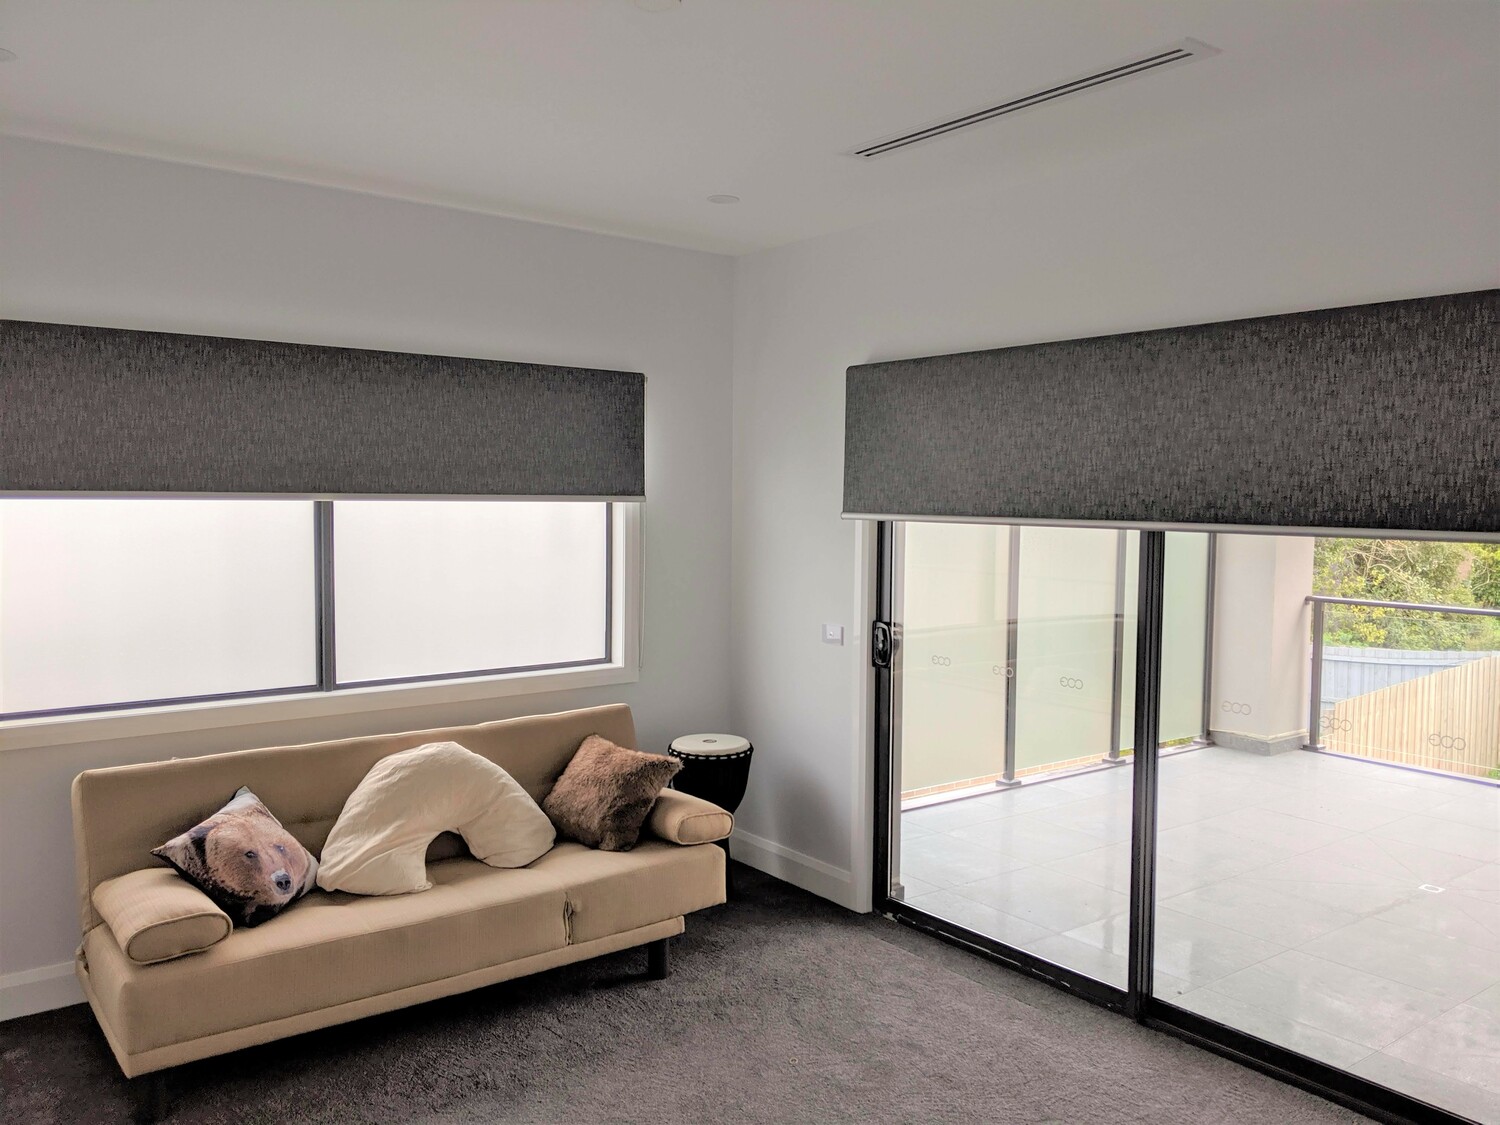 <span style="font-weight: bold;">Blockout Roller Blinds</span>